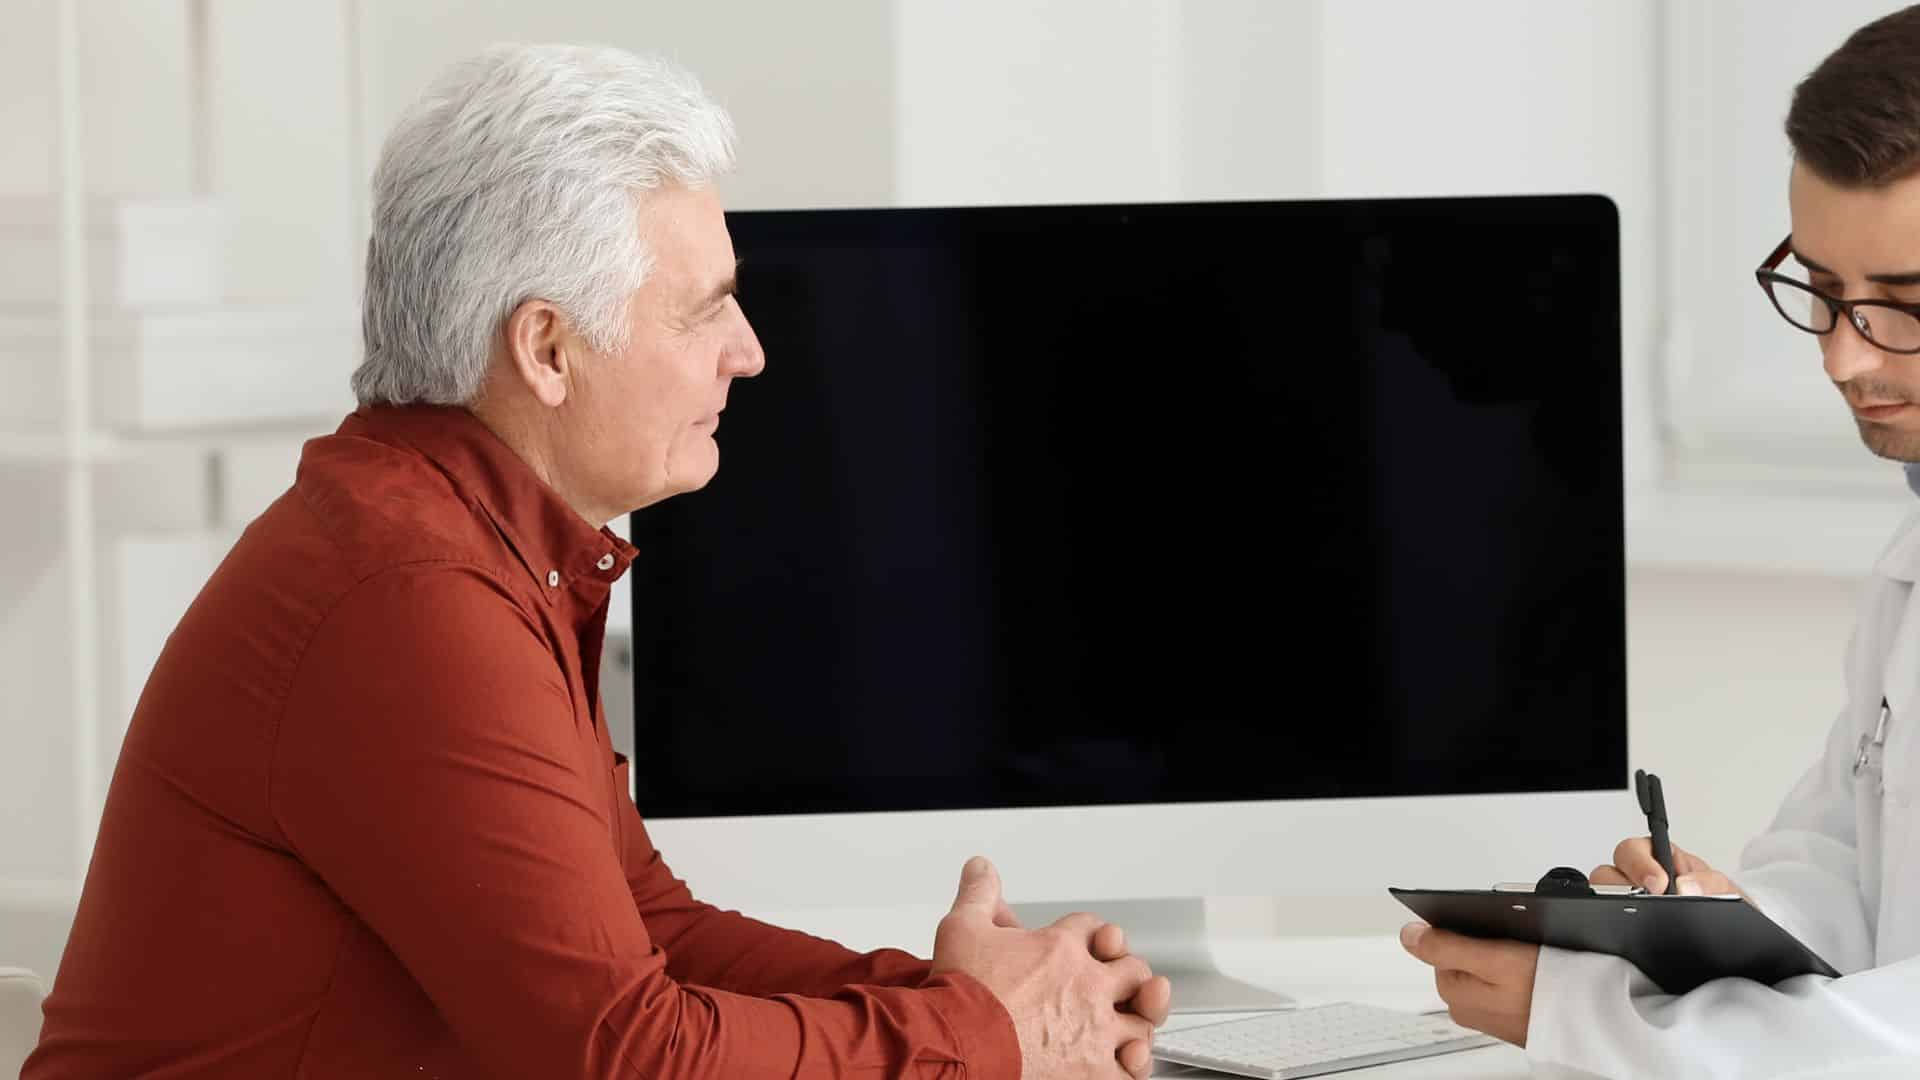 Penis health for men in their 60s